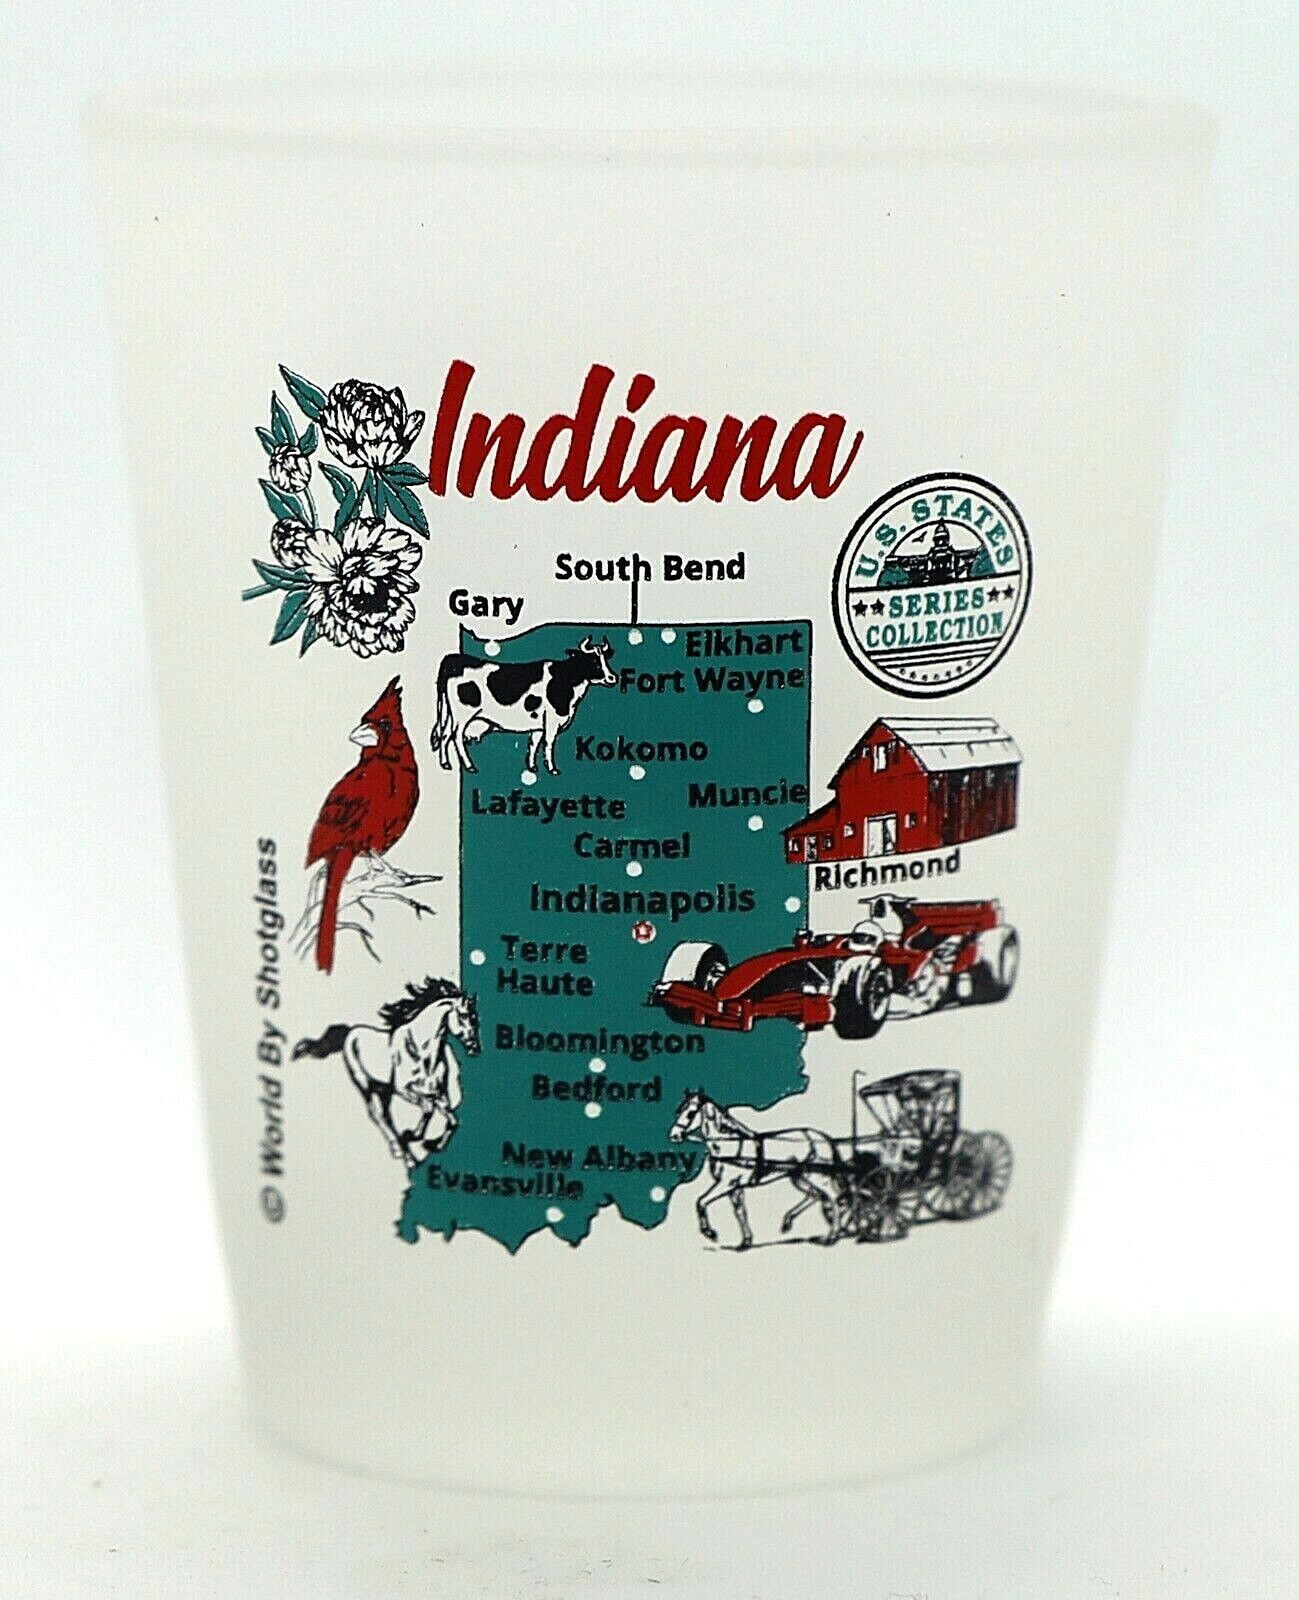 Indiana US States Series Collection Shot Glass